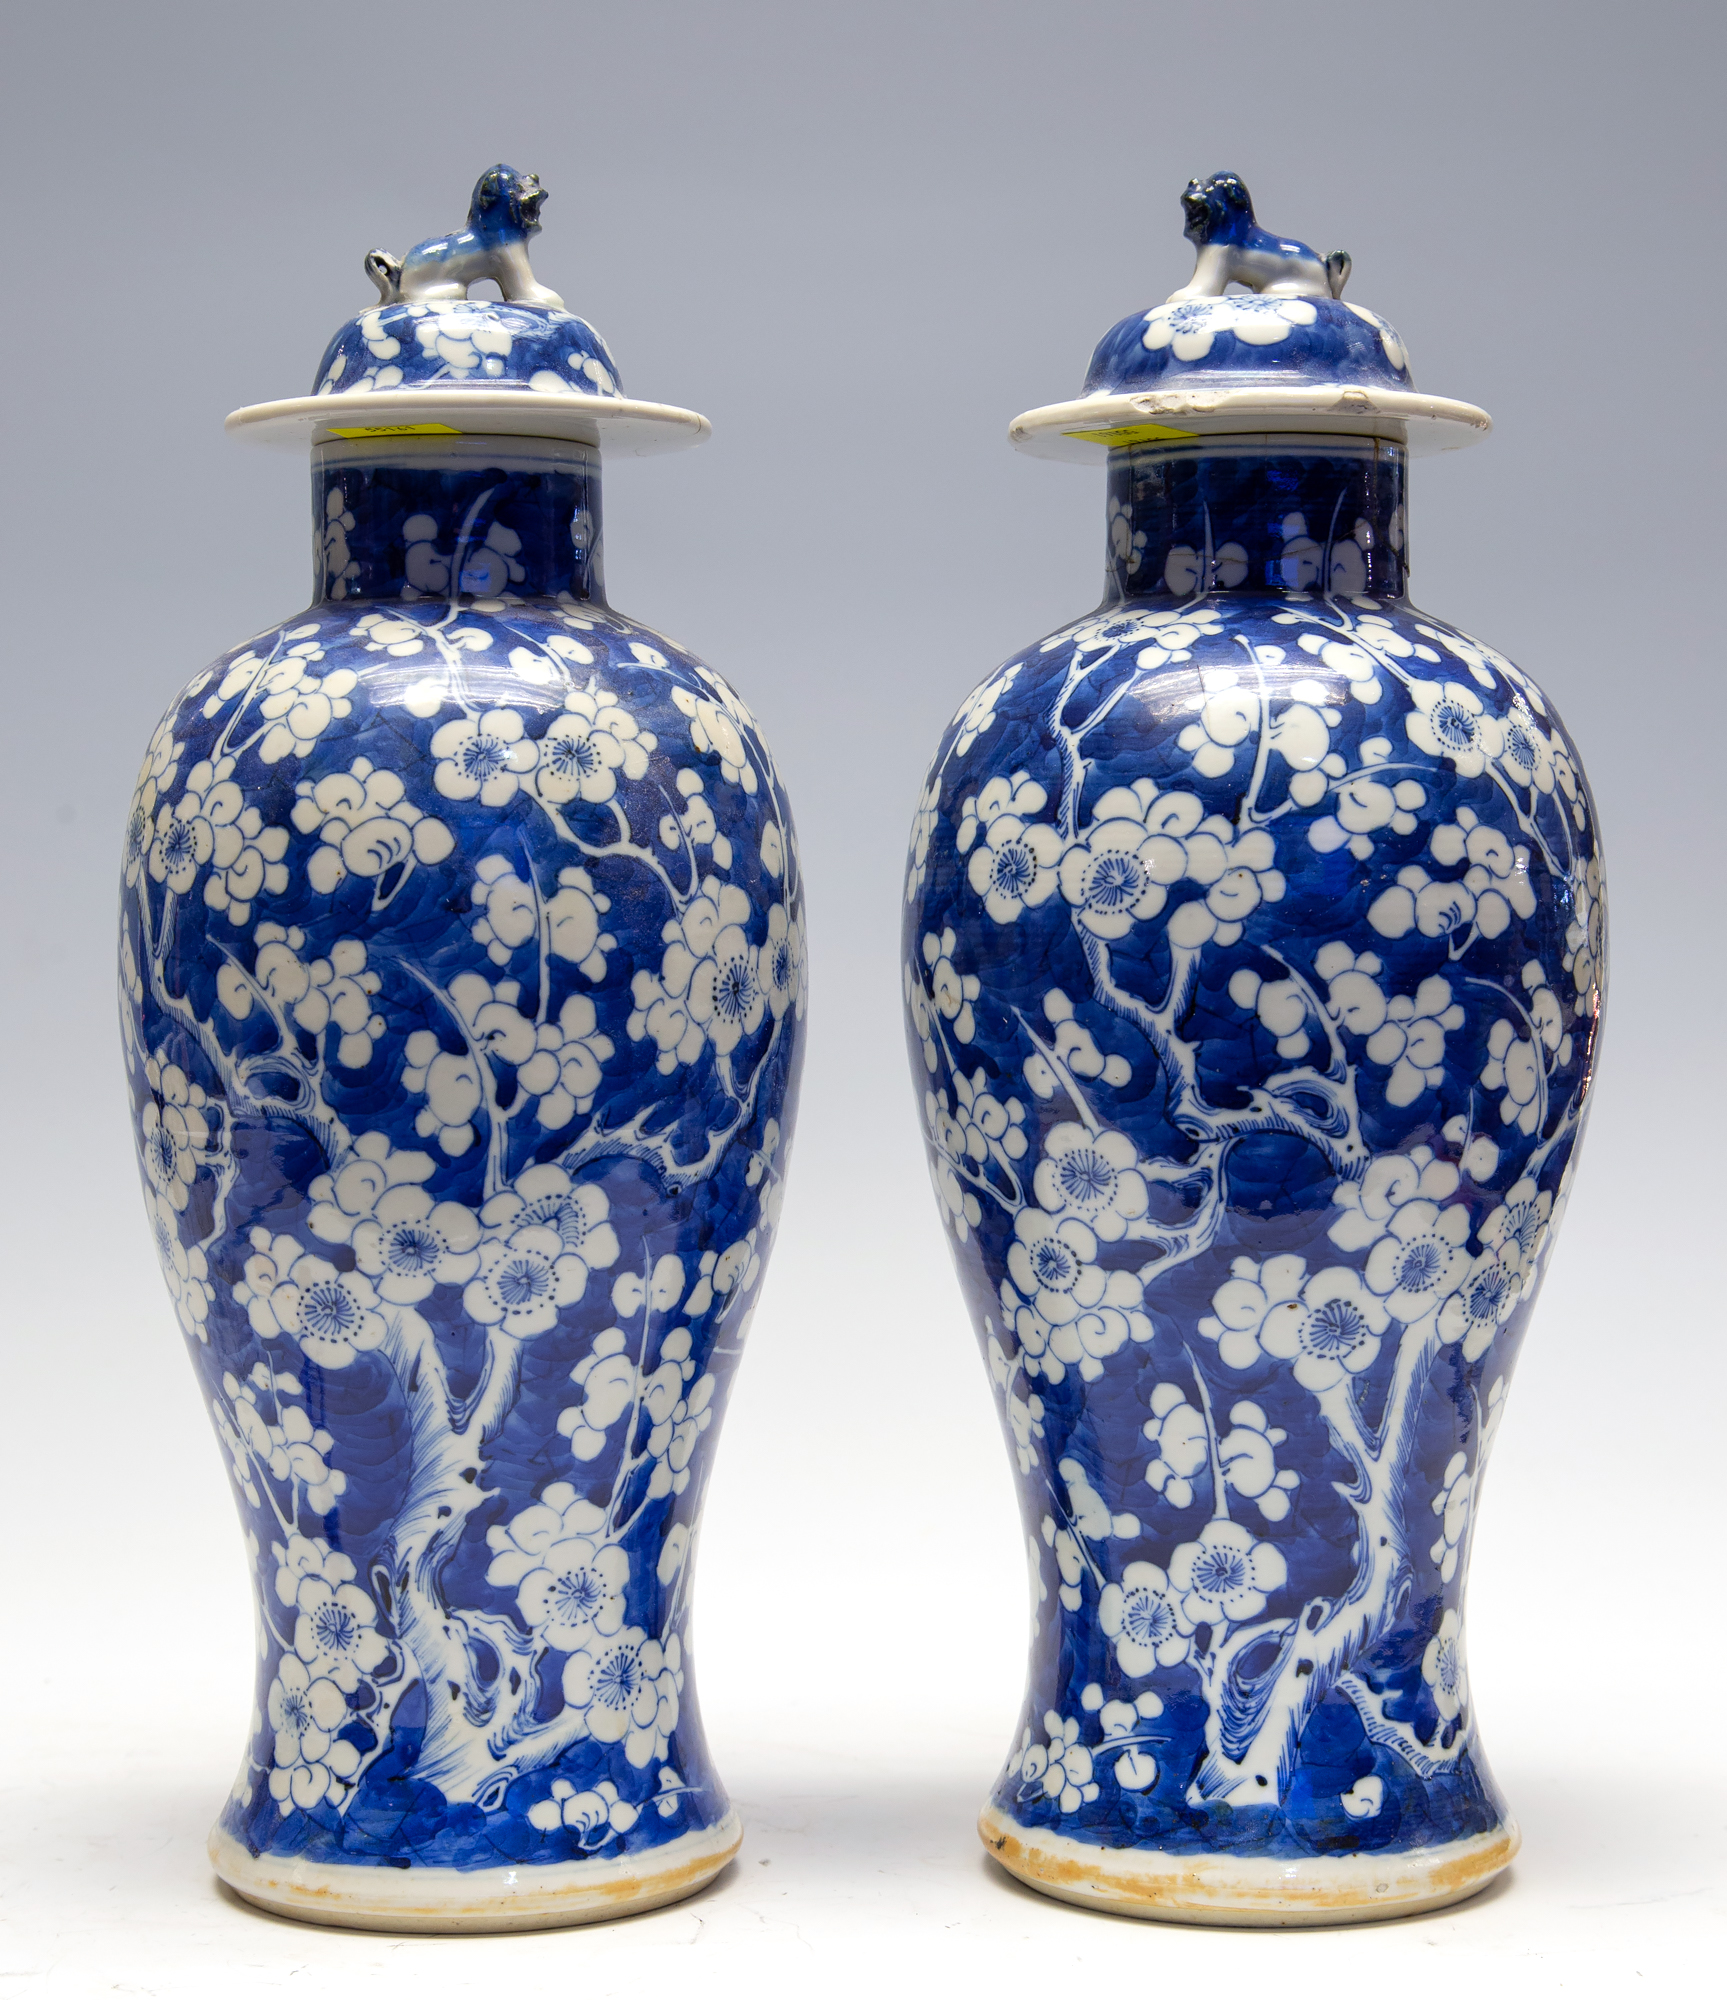 A pair of Chinese blue and white baluster vases and covers, late 19th Century with Kangxi marks,